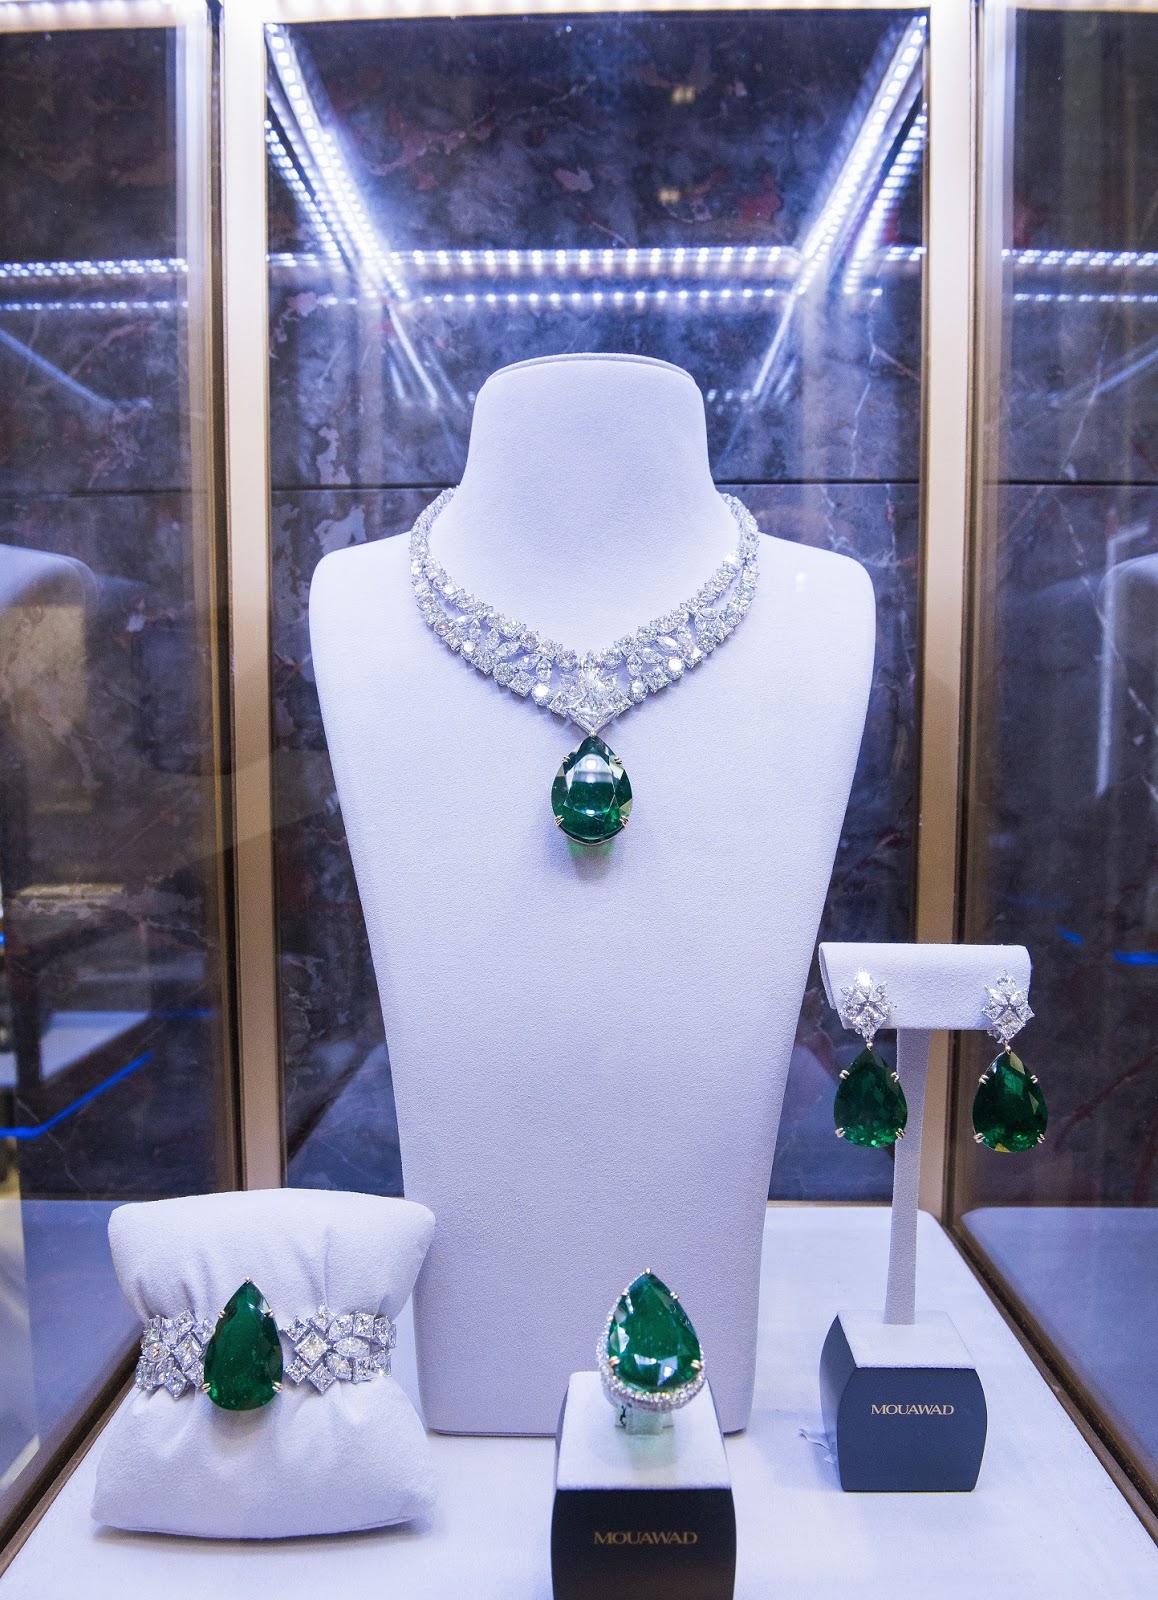 Jewelry News Network: Mouawad Opens Shiny New Boutique In Geneva